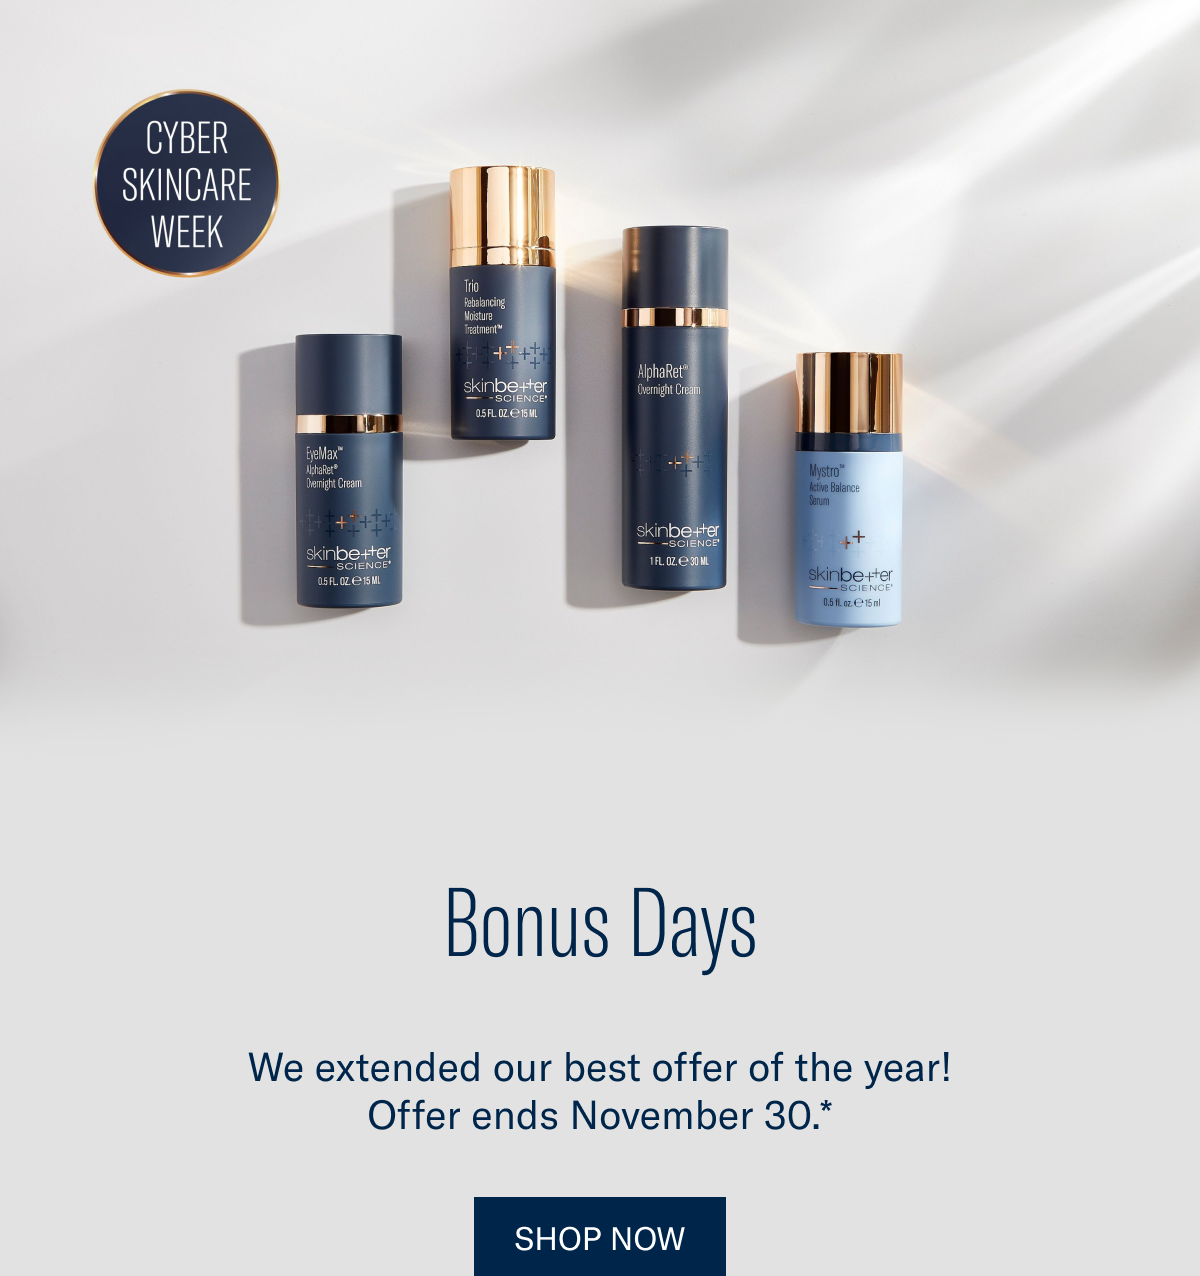 We extended our best offer of the year!